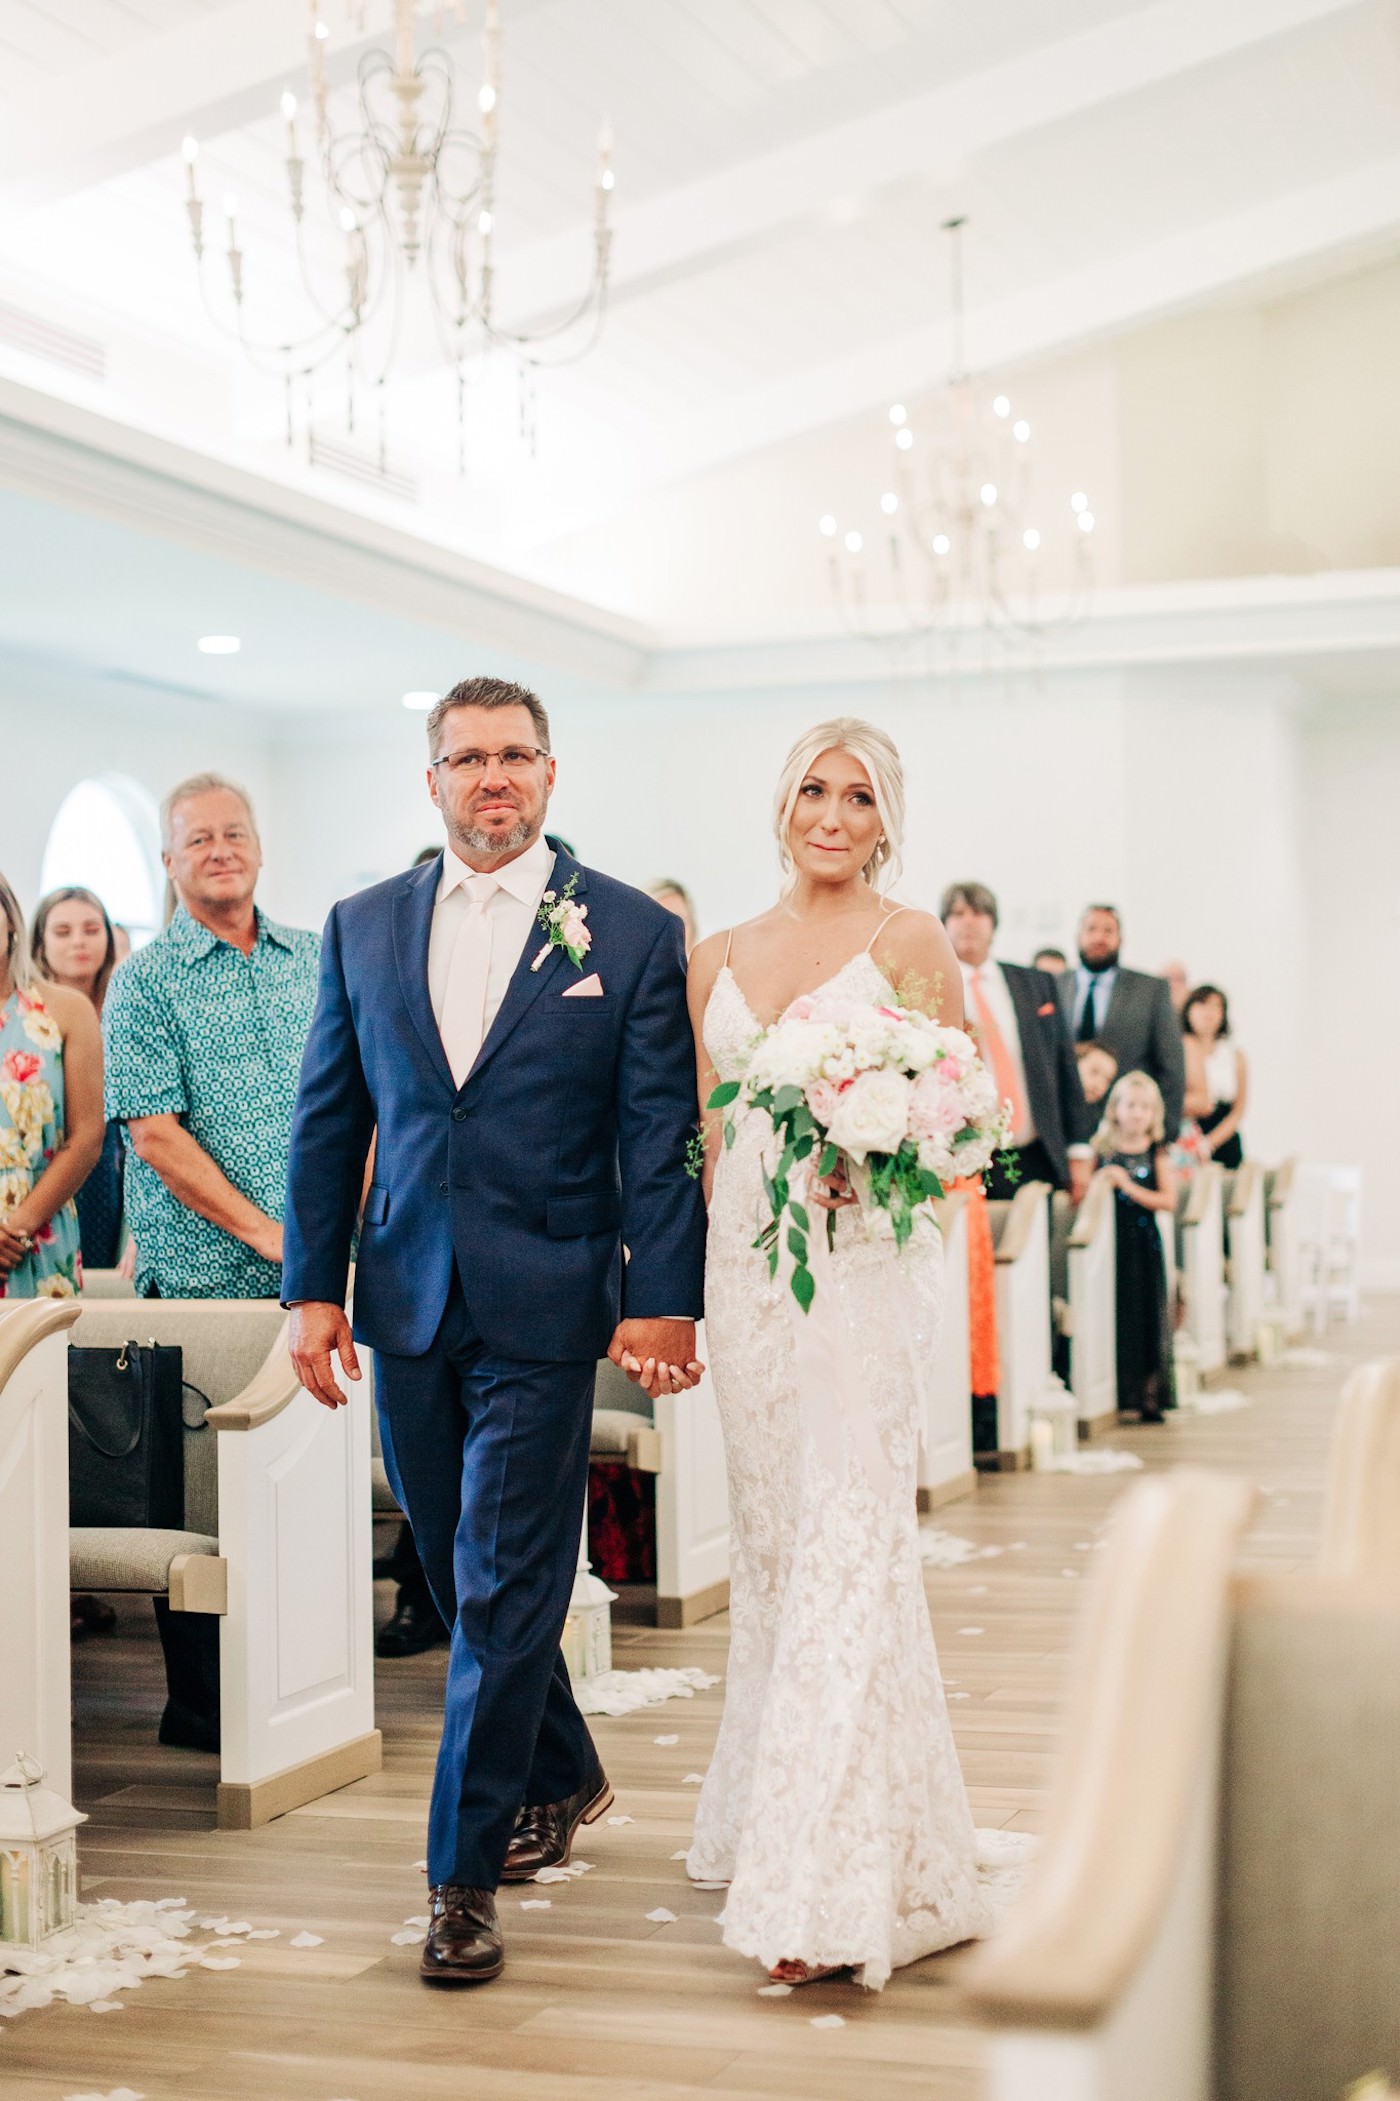 Bride and Dad Walking Down the Aisle at Safety Harbor Wedding Ceremony Venue Harborside Chapel | Father of the Bride in Navy Blue Suit | Ivory and Champagne Lace Wedding Gown